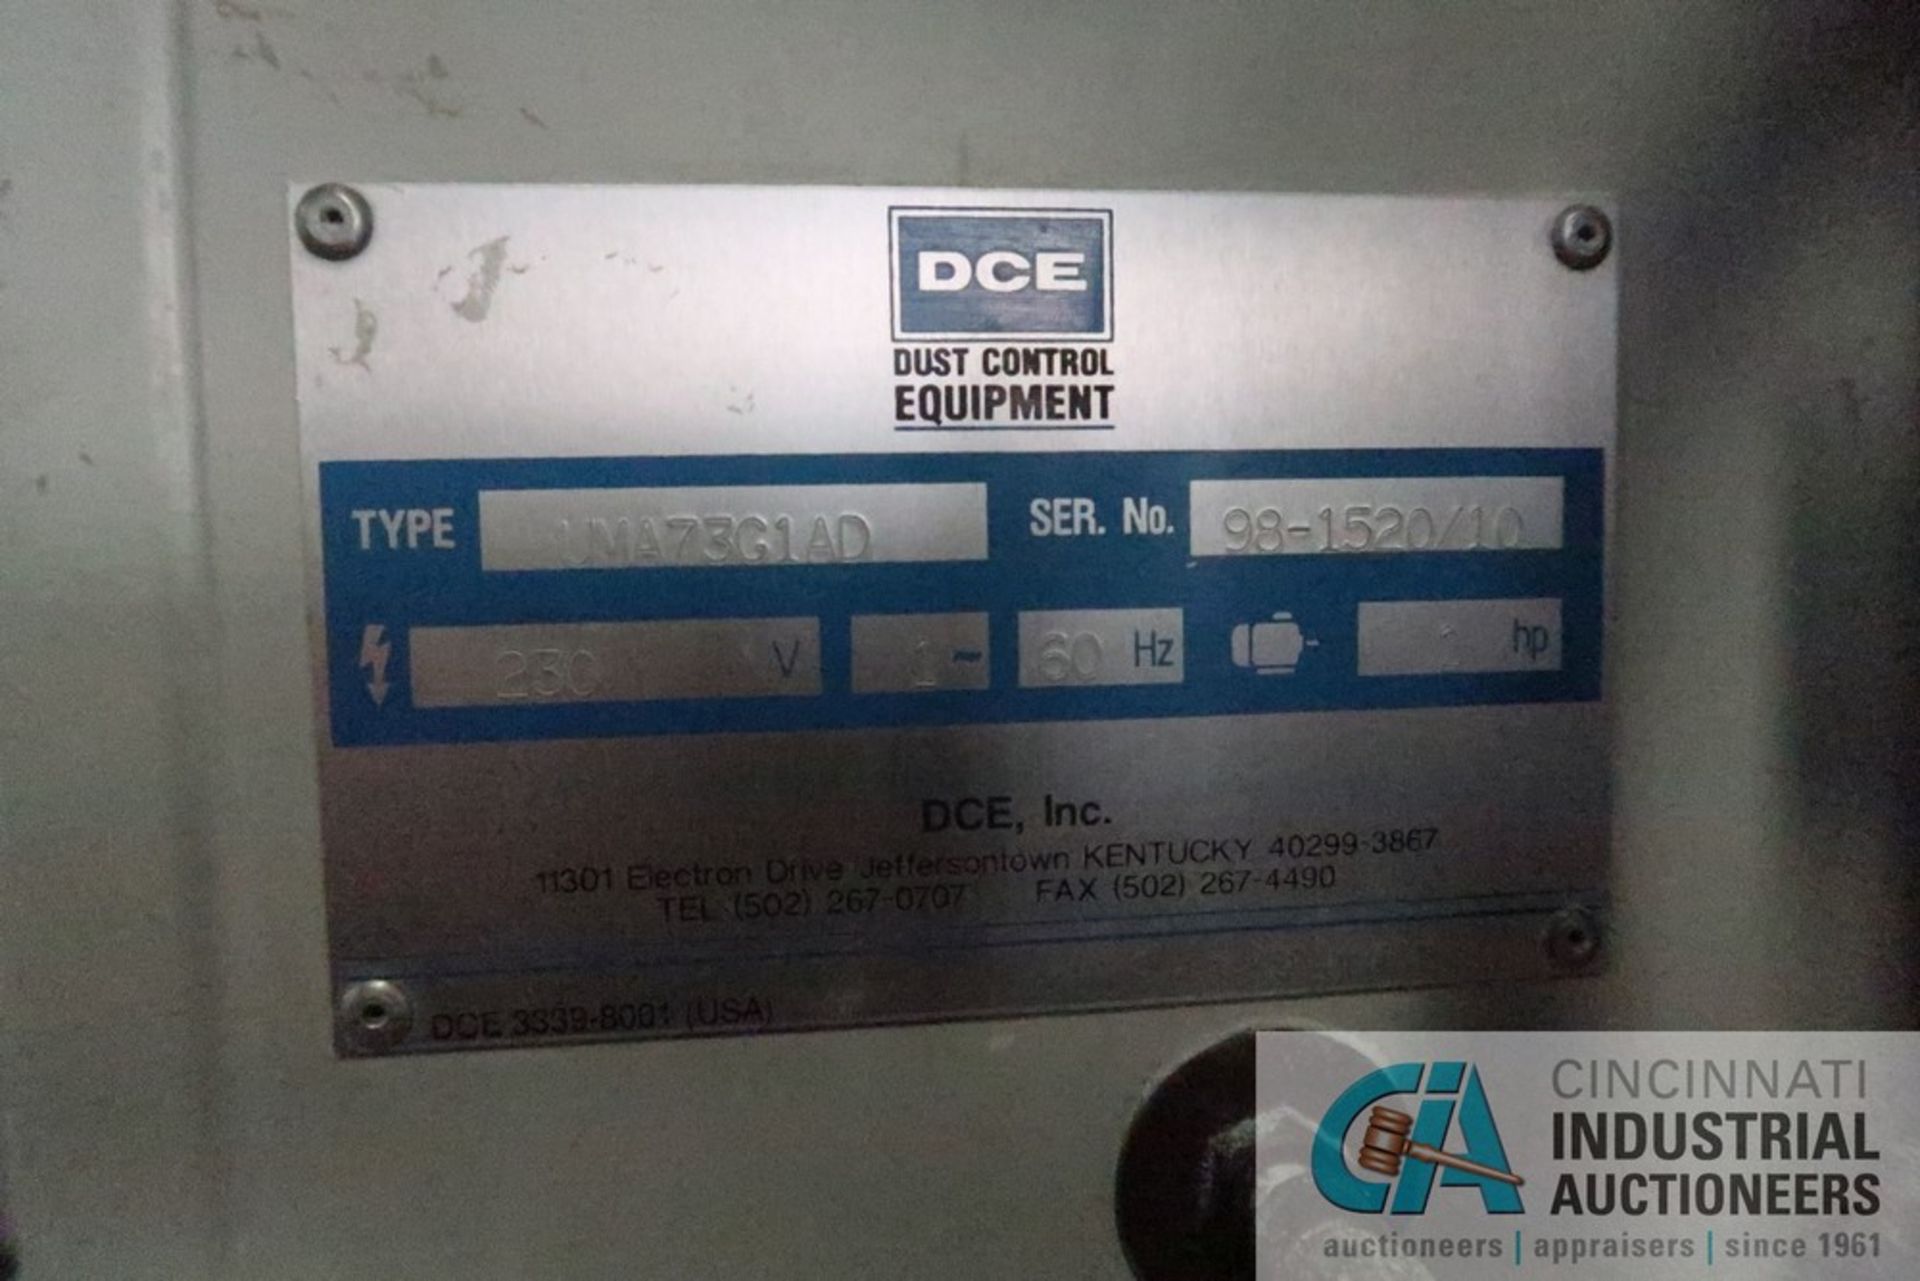 1 HP DCE MODEL UMA76G1AD UNIMASTER SINGLE BAG DUST COLLECTOR; S/N 98-1520/10 **LOCATED AT 110 E - Image 3 of 3